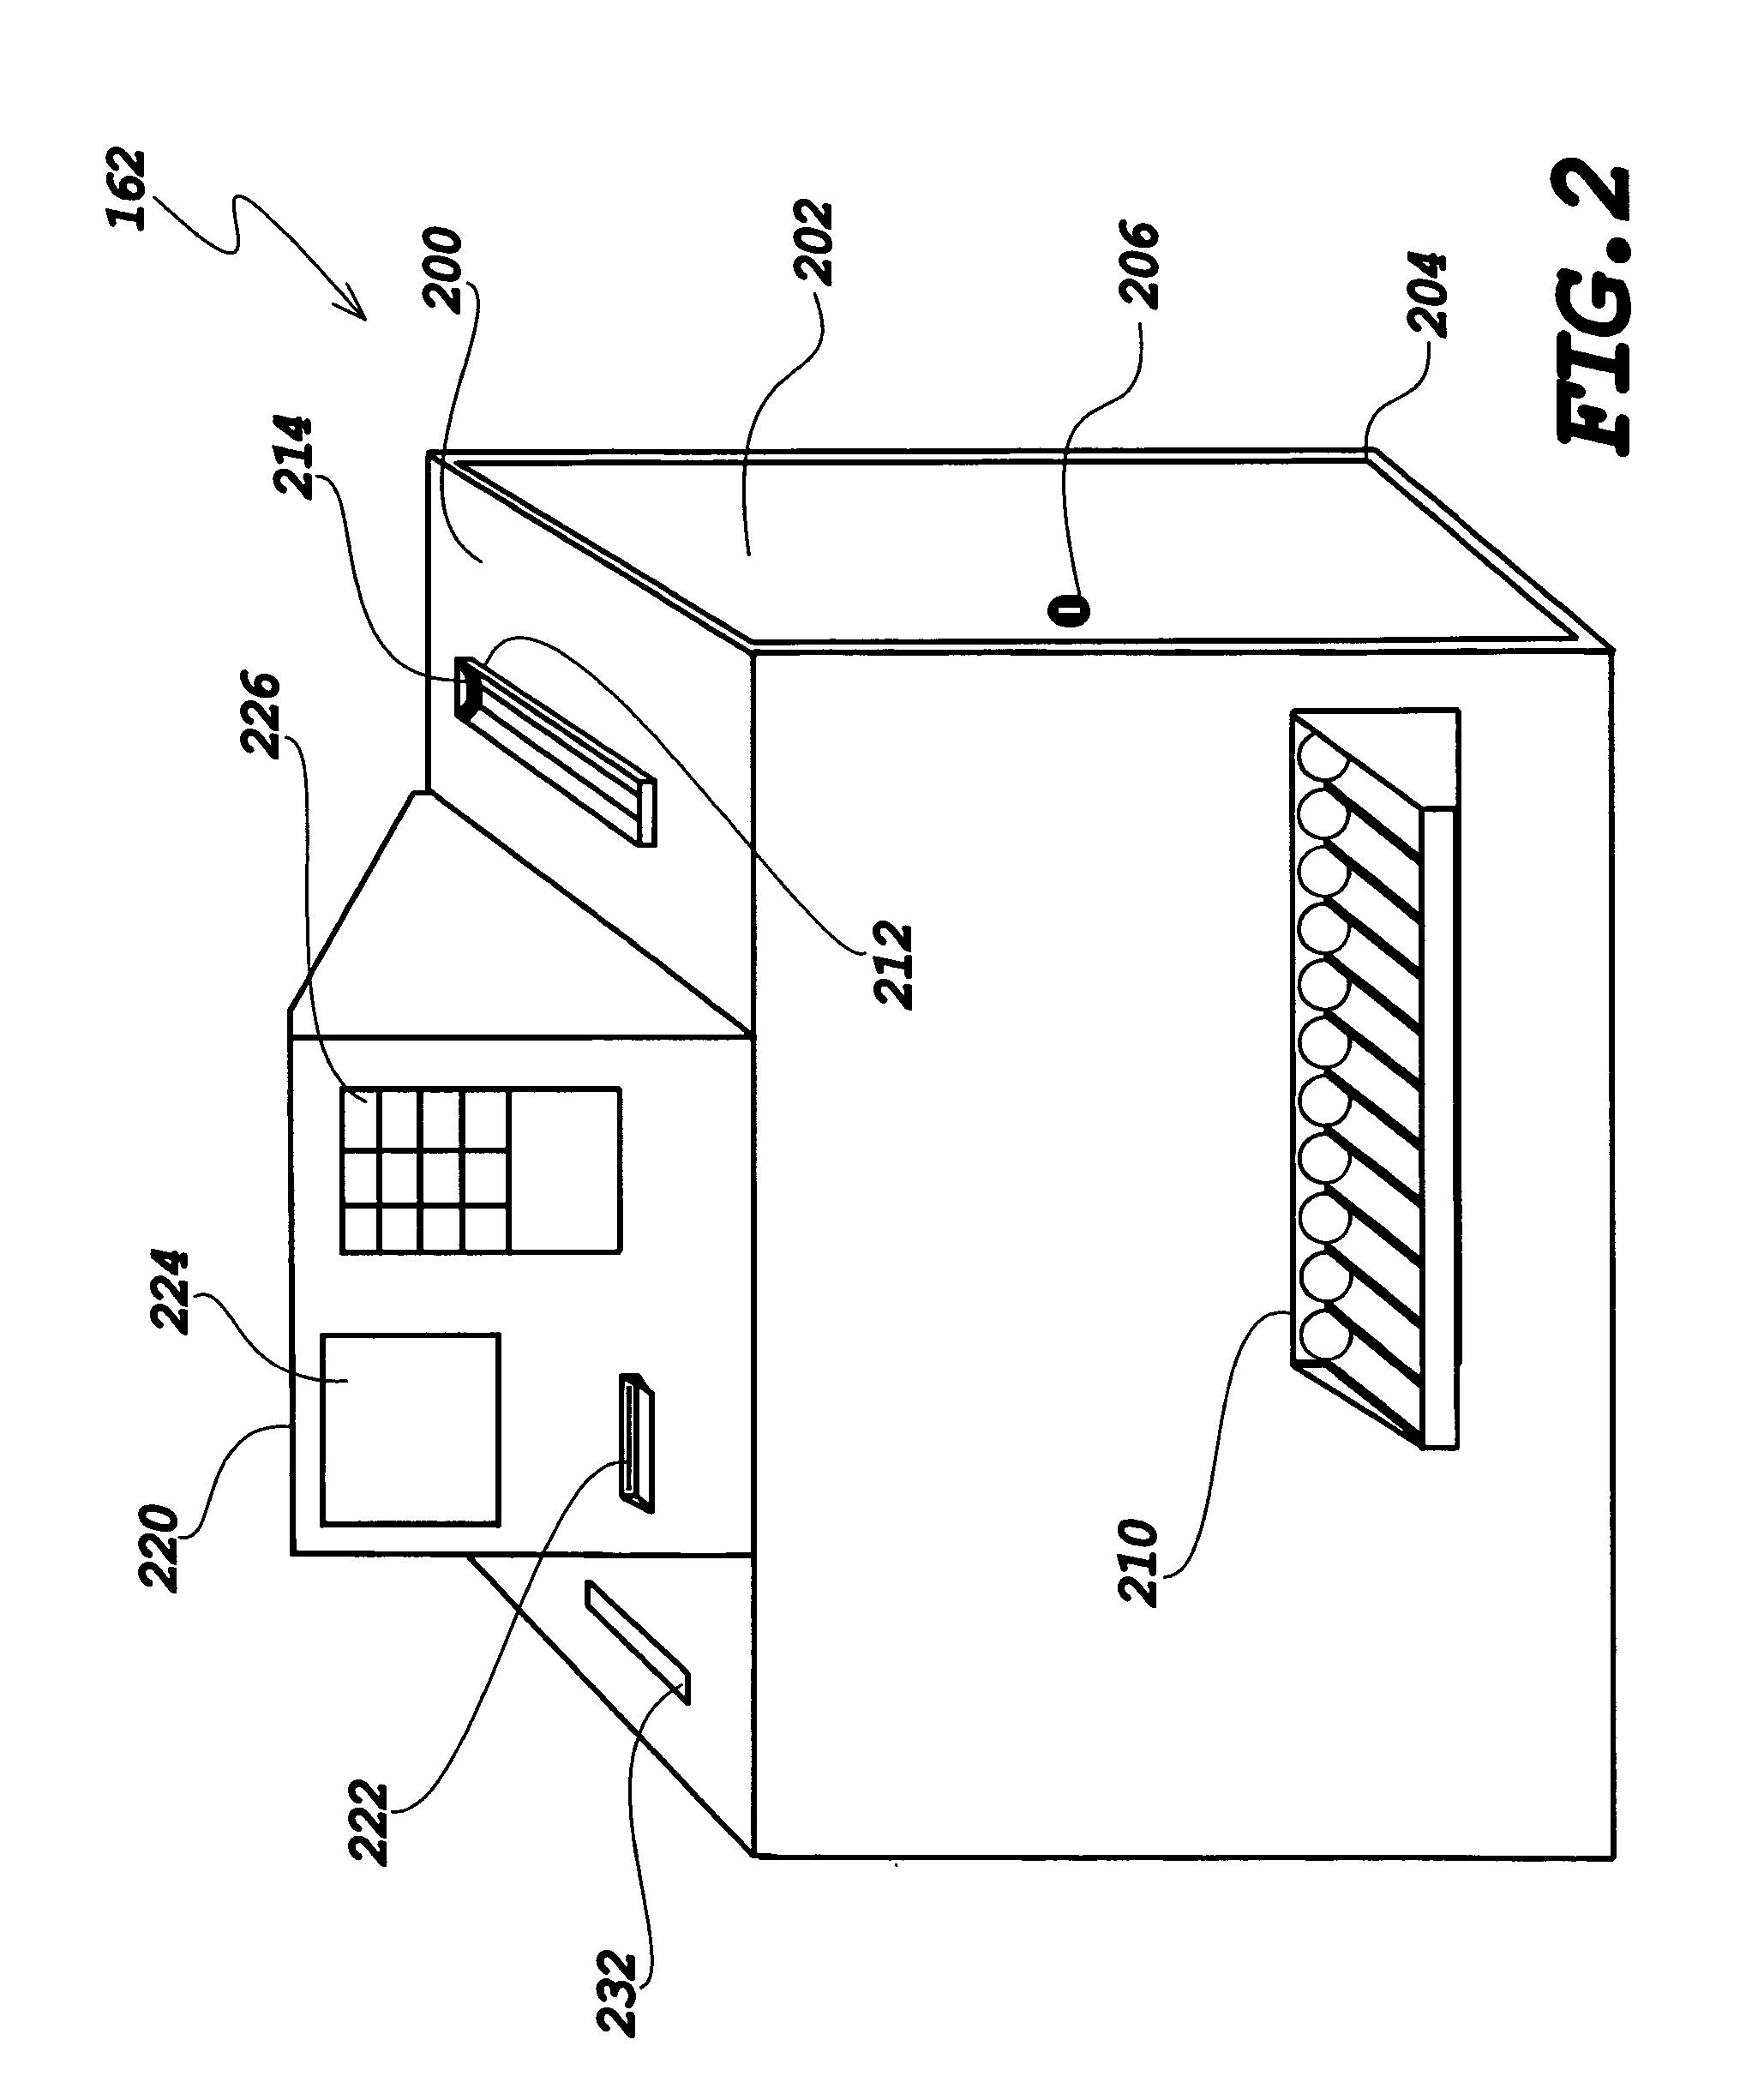 Chip tray loading device and process